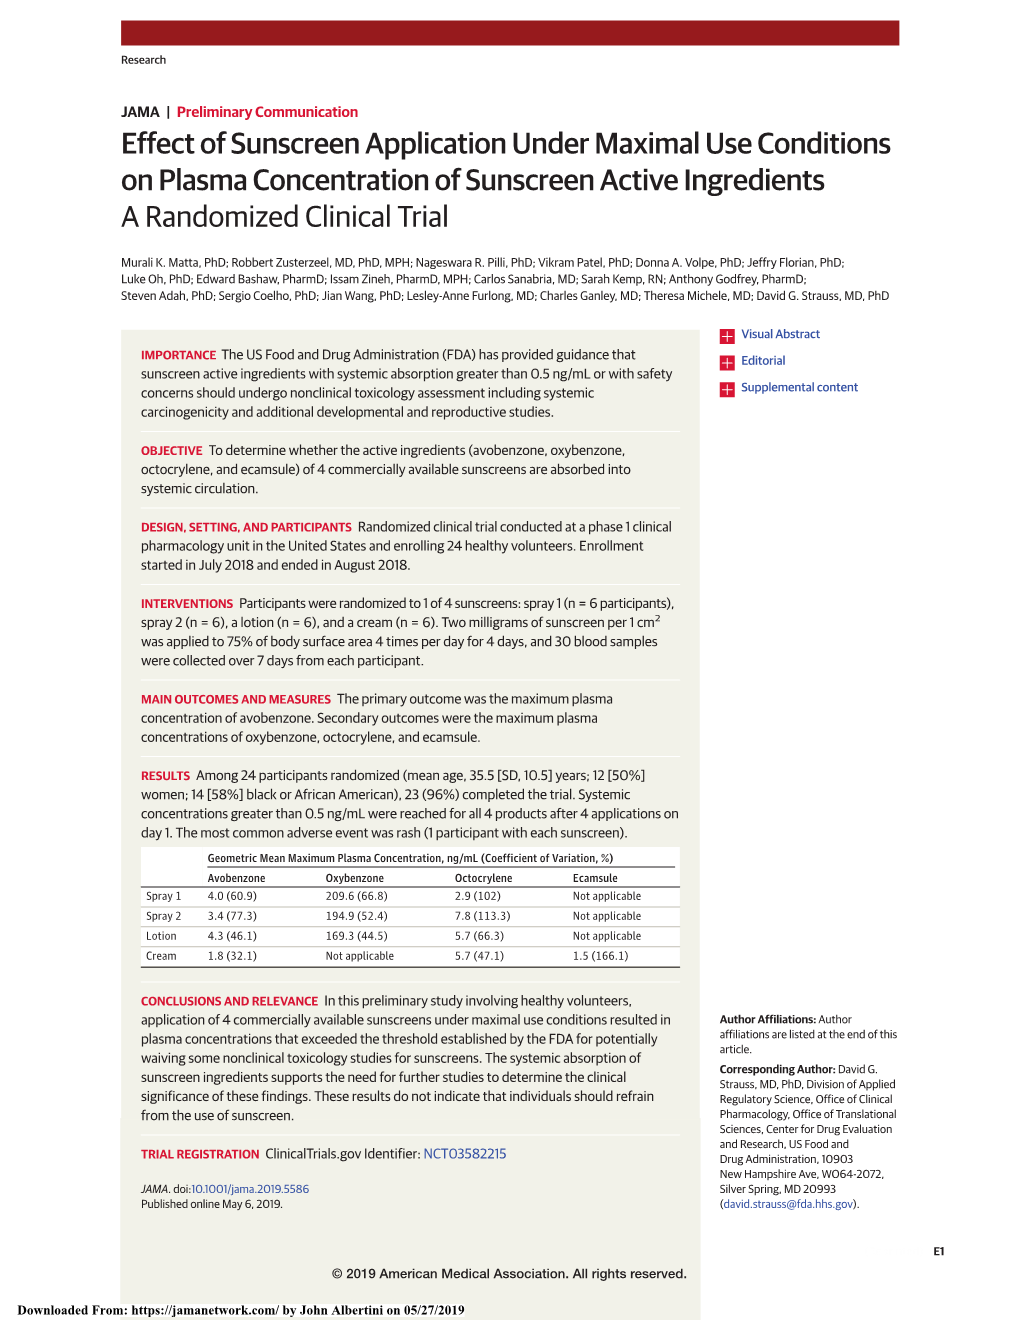 Effect of Sunscreen Application Under Maximal Use Conditions on Plasma Concentration of Sunscreen Active Ingredients a Randomized Clinical Trial